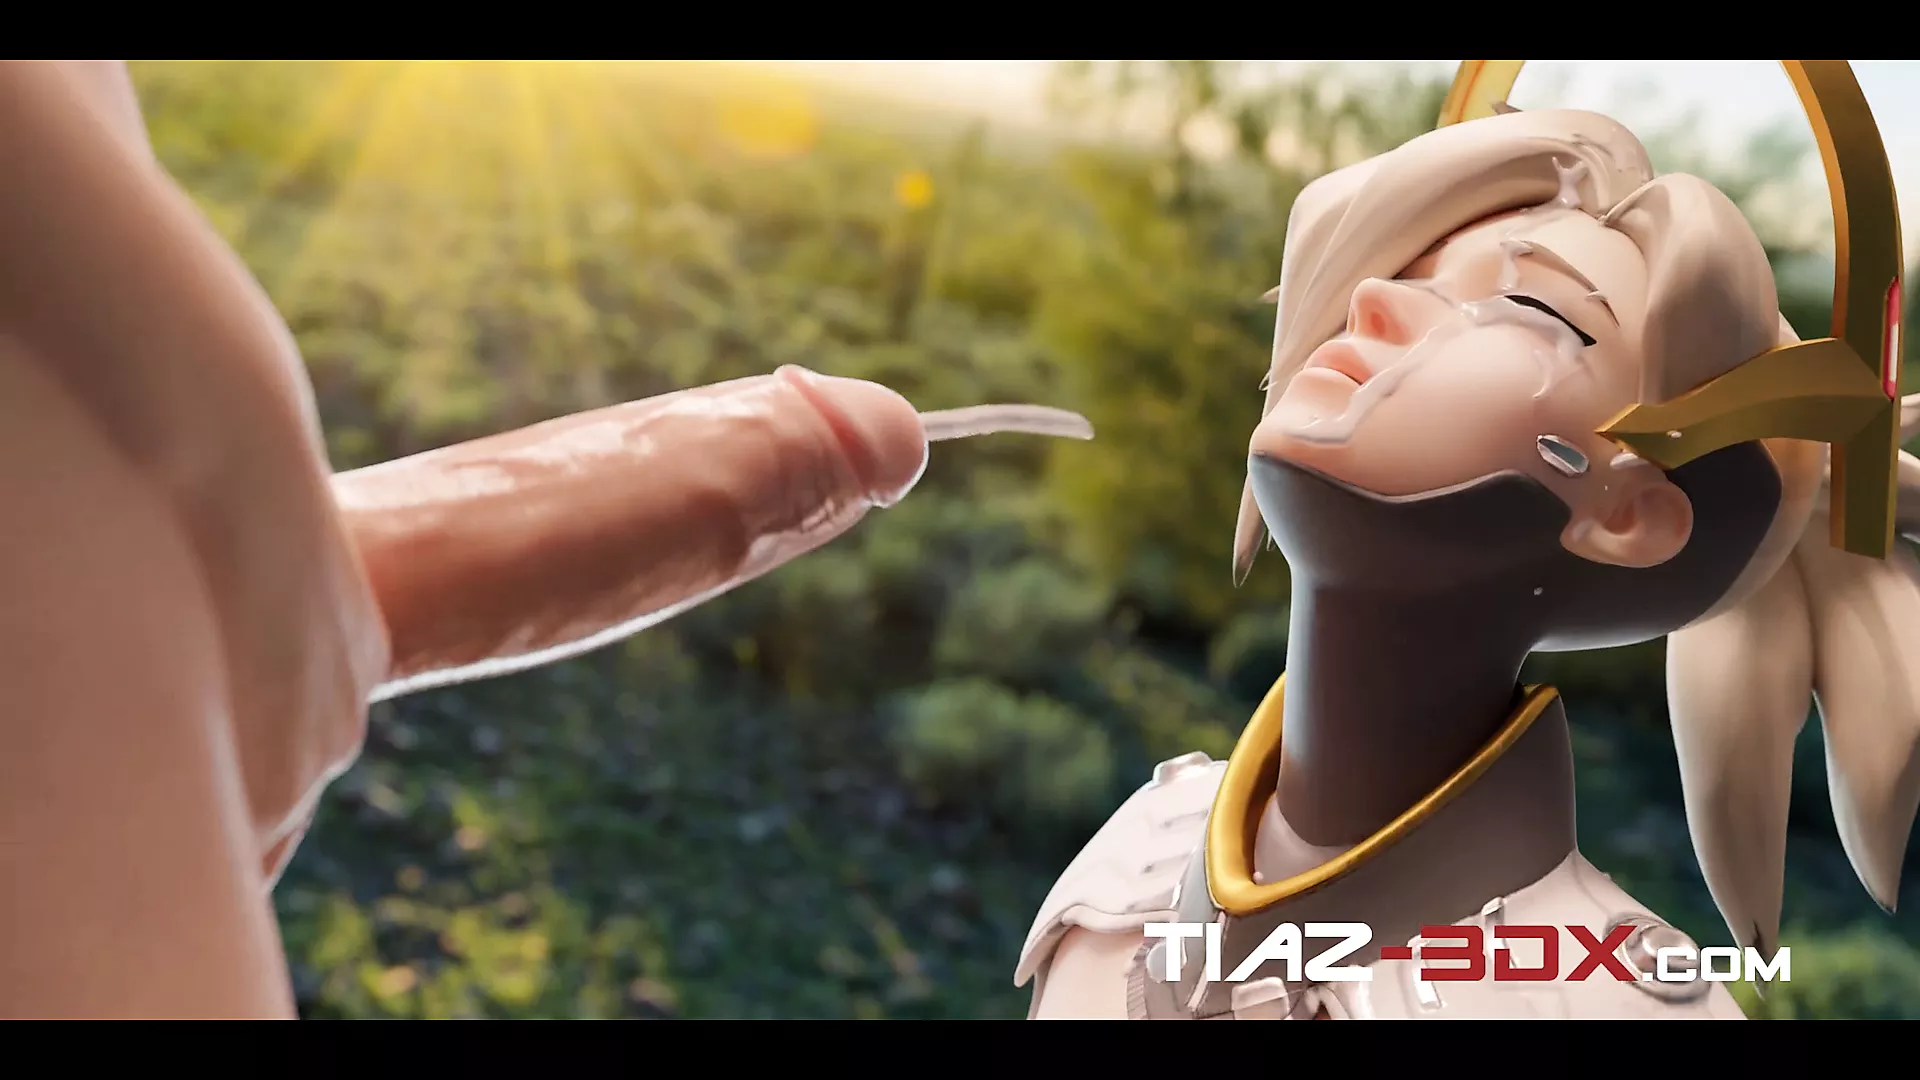 Overwatch Porn 3D Animation Compilation 73: Free HD Porn 89